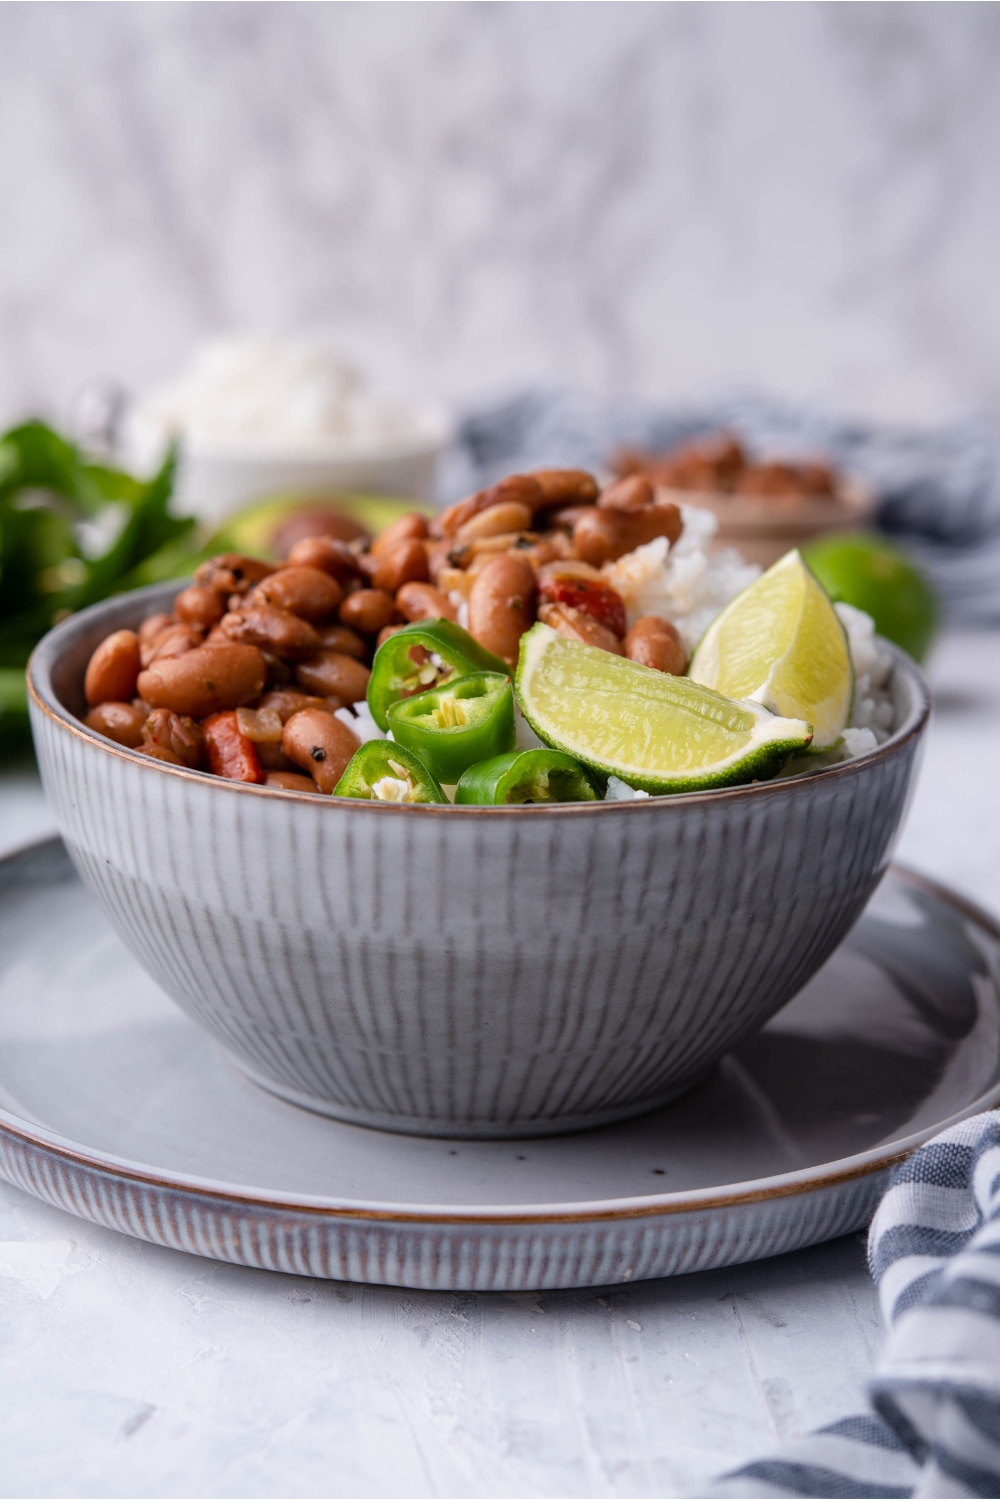 A grey bowl atop a grey plate filled with pinto beans and white rice, garnished with lime wedges and sliced peppers.